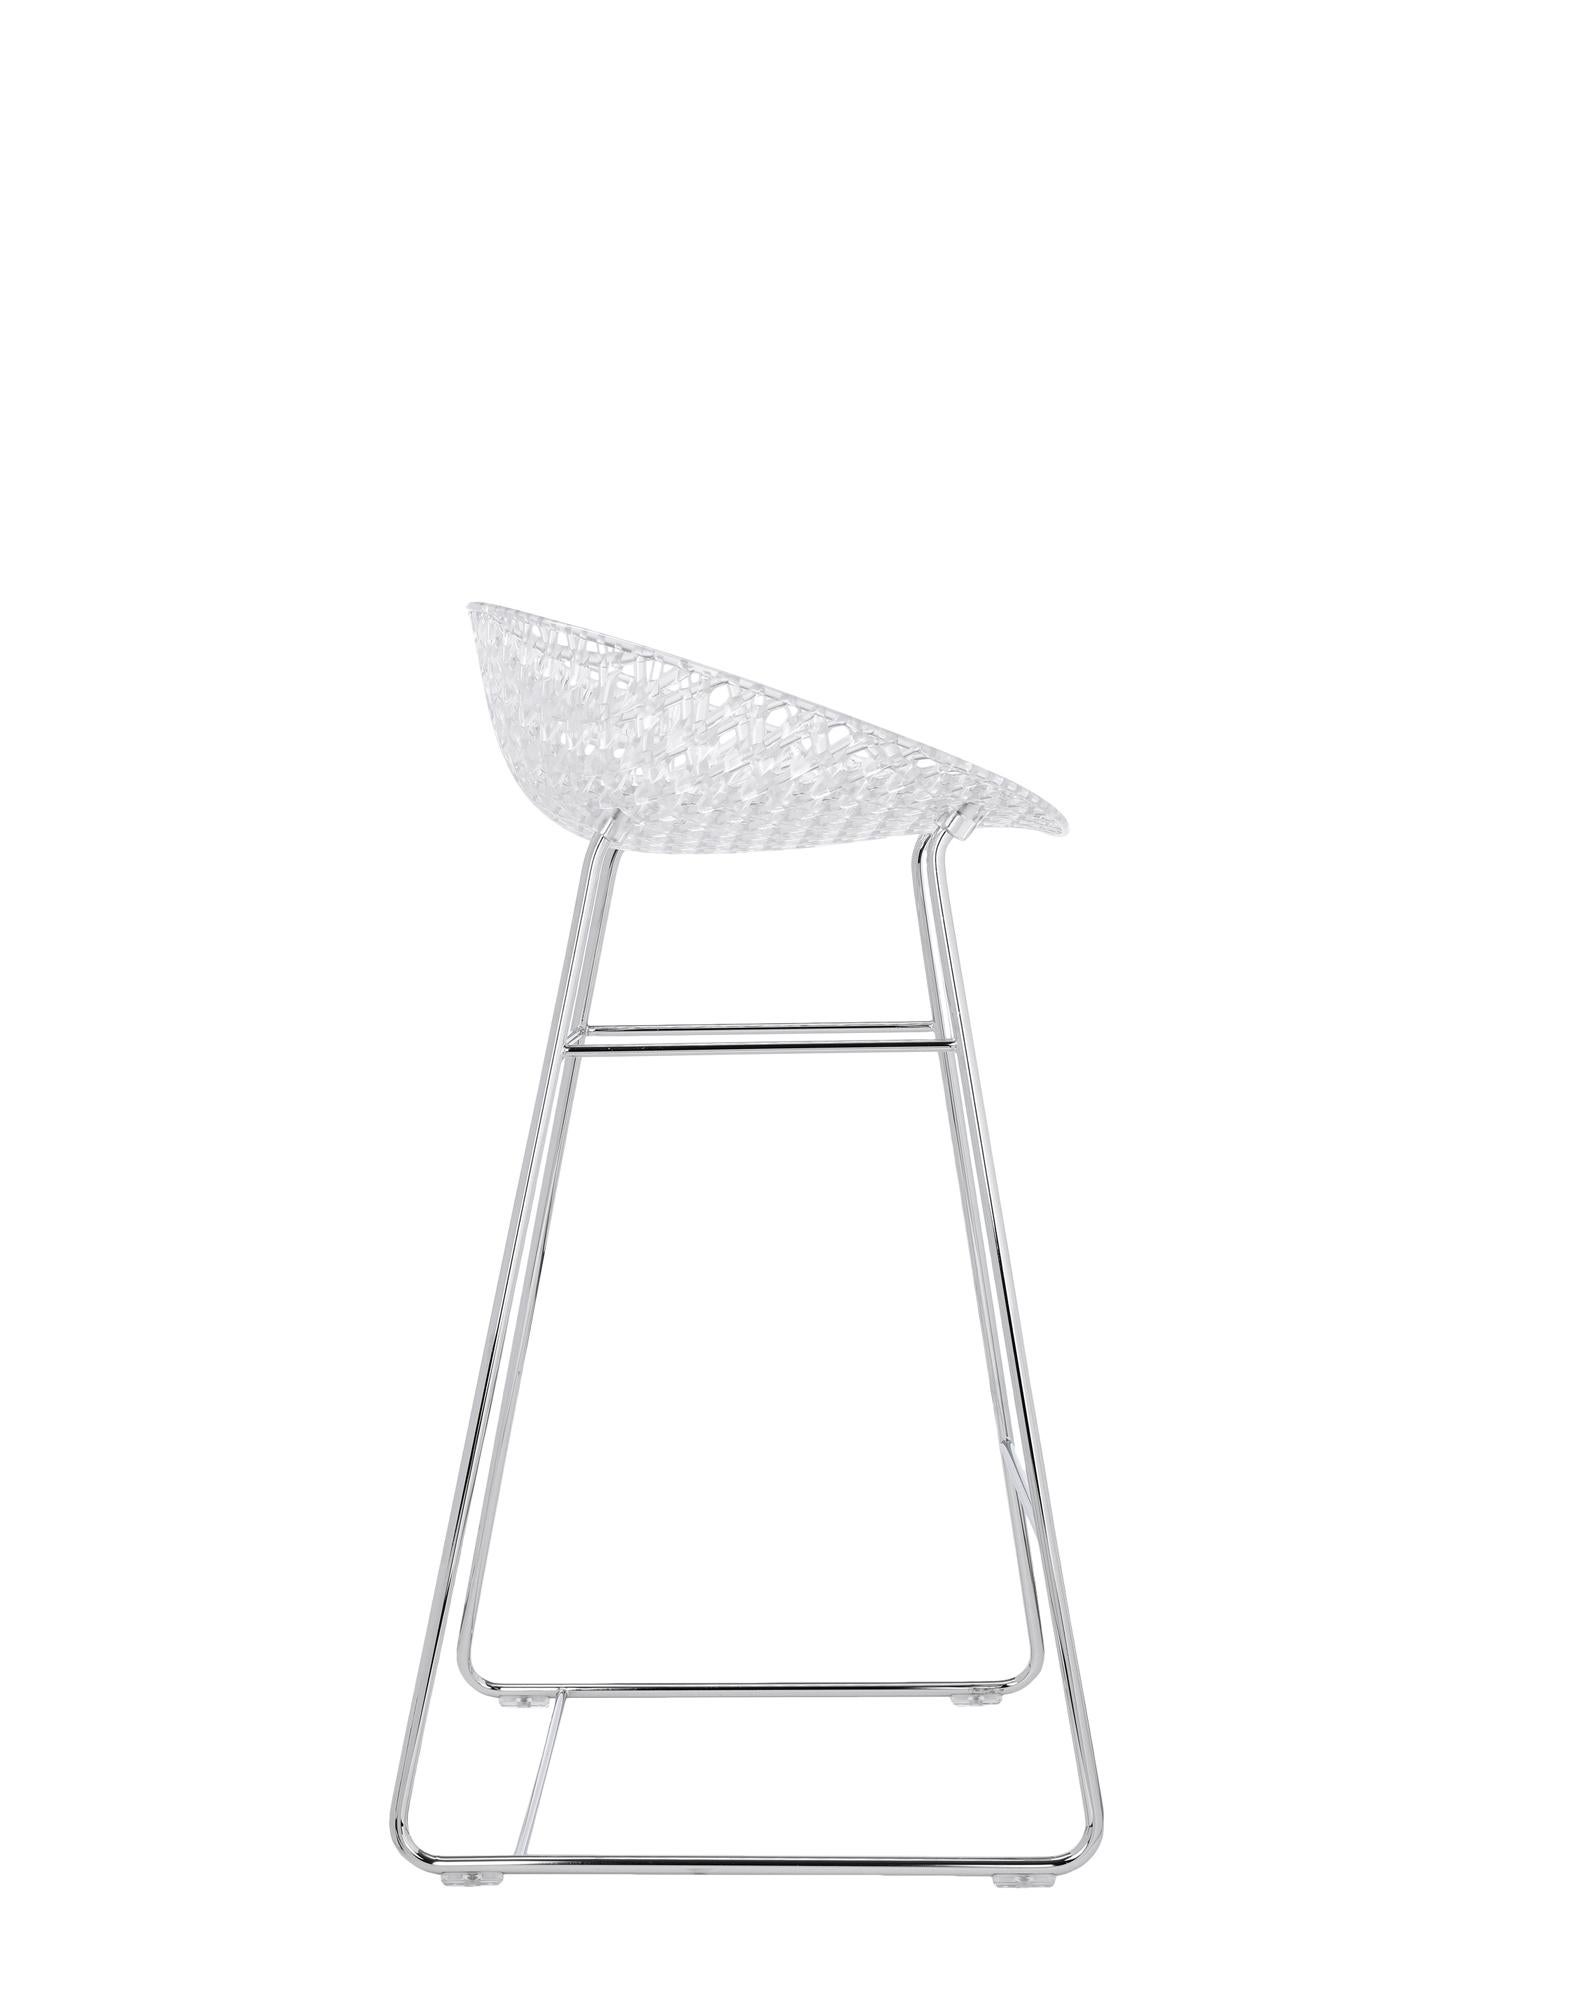 Kartell Smatrik Stool in White by Tokujin Yoshioka In New Condition For Sale In Brooklyn, NY